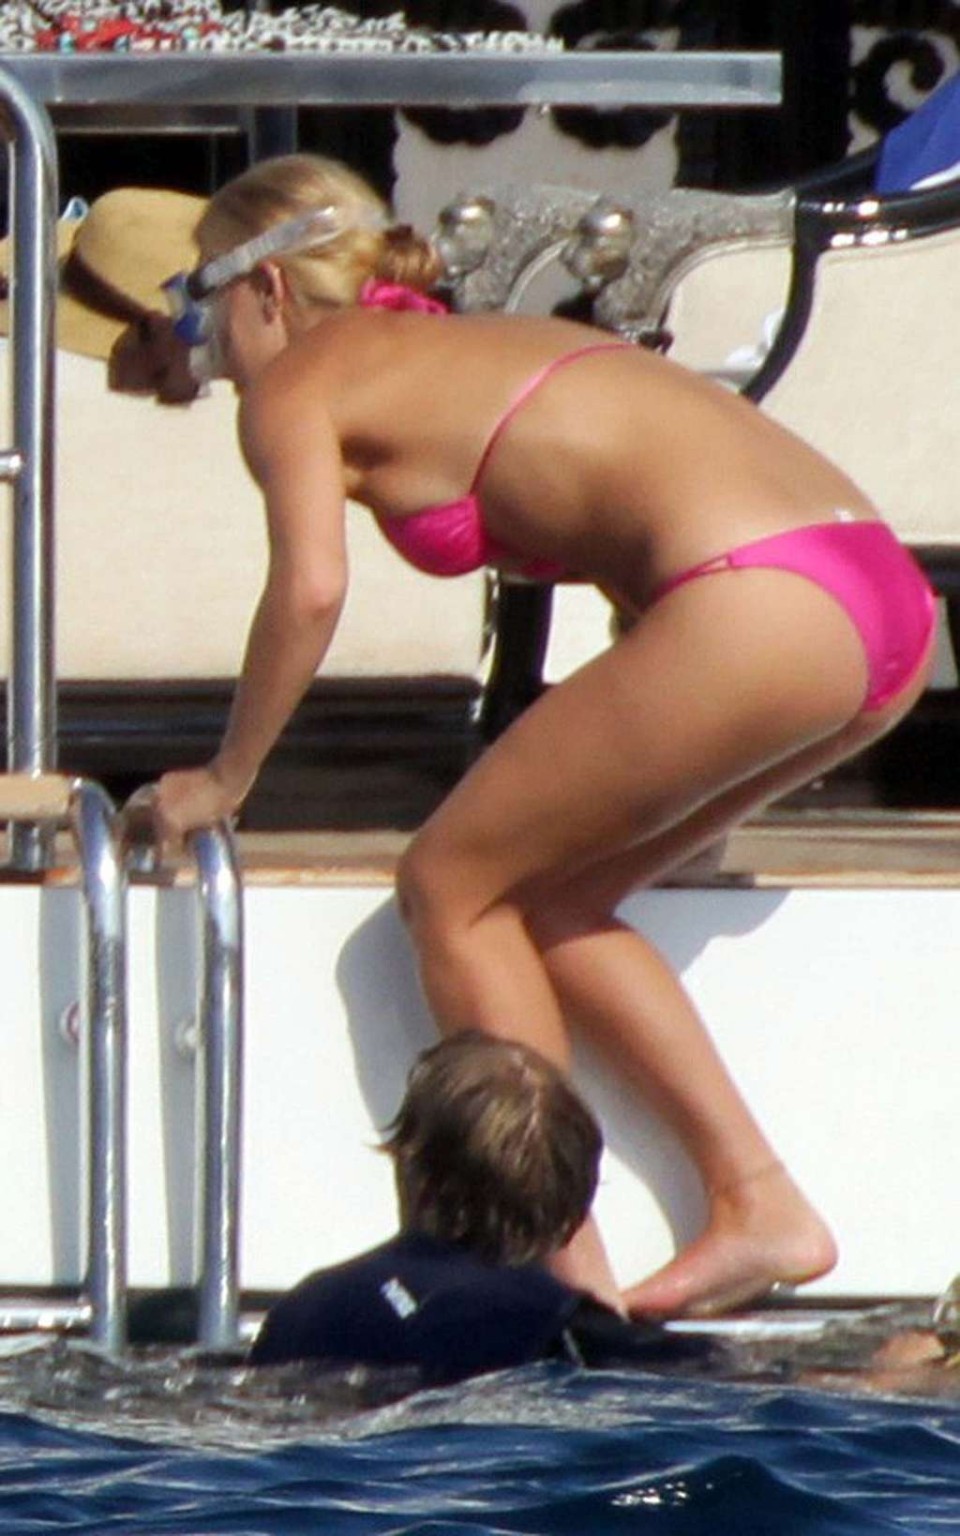 Bar Refaeli Looking Very Sexy In Red Bikini On Yacht Paparazzi Pictures Porn Pictures Xxx